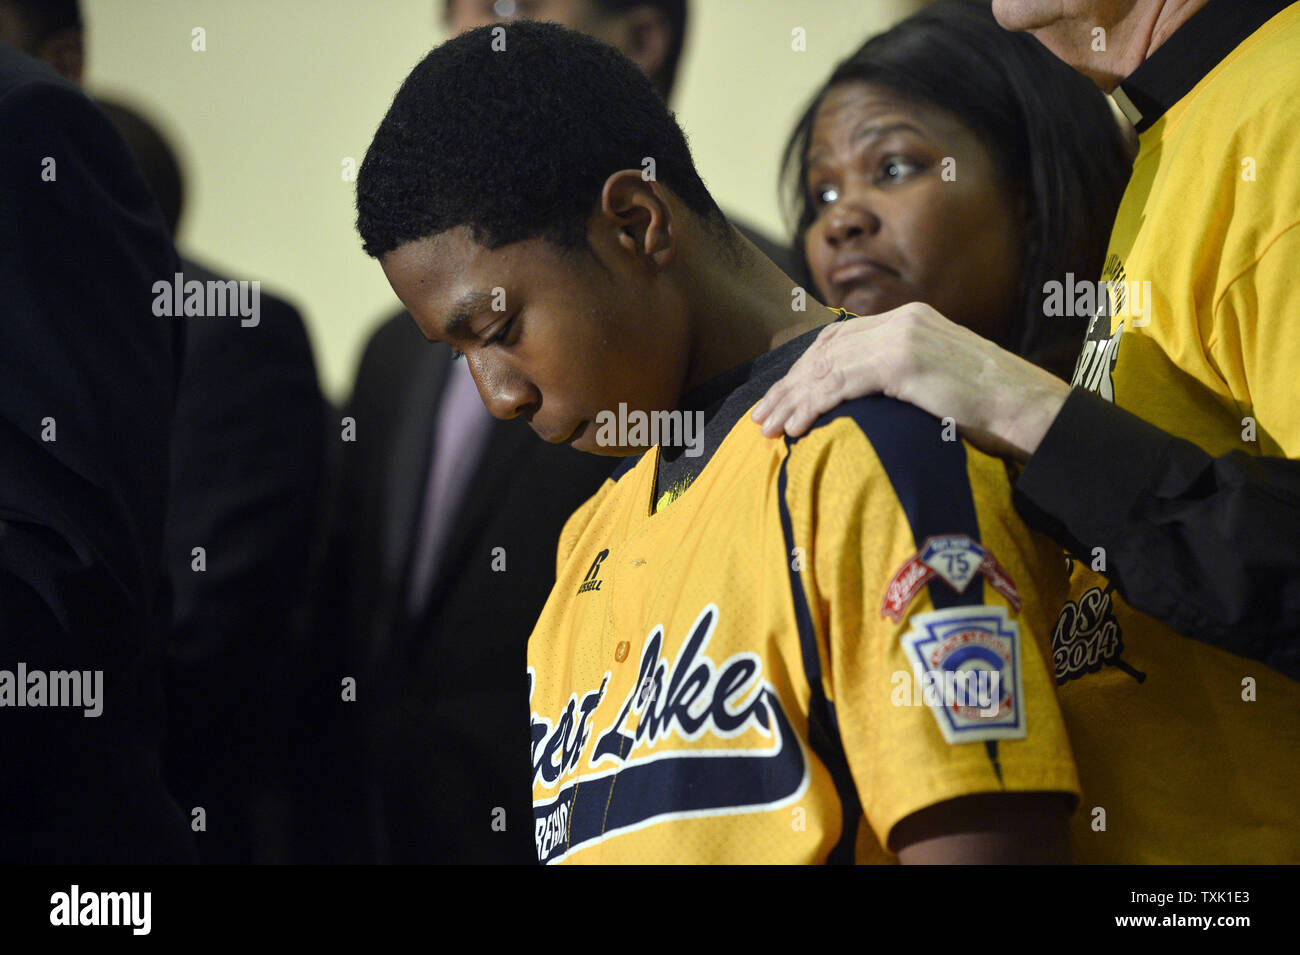 Jackie Robinson West little leaguer Brandon Green stands listens to speakers at a news conference called by reverends Jesse Jackson and Michael Pfleger at Operation Push Headquarters on February 11, 2015 in Chicago. Little League Baseball announced Wednesday that Jackie Robinson West used a falsified boundary map to claim players from other districts and must vacate wins from the 2014 Little League Baseball International Tournament, including its Great Lakes Regional and United States championships. Jackson and Pfleger alleged that Jackie Robinson West faced unequal scrutiny as the only all-Af Stock Photo